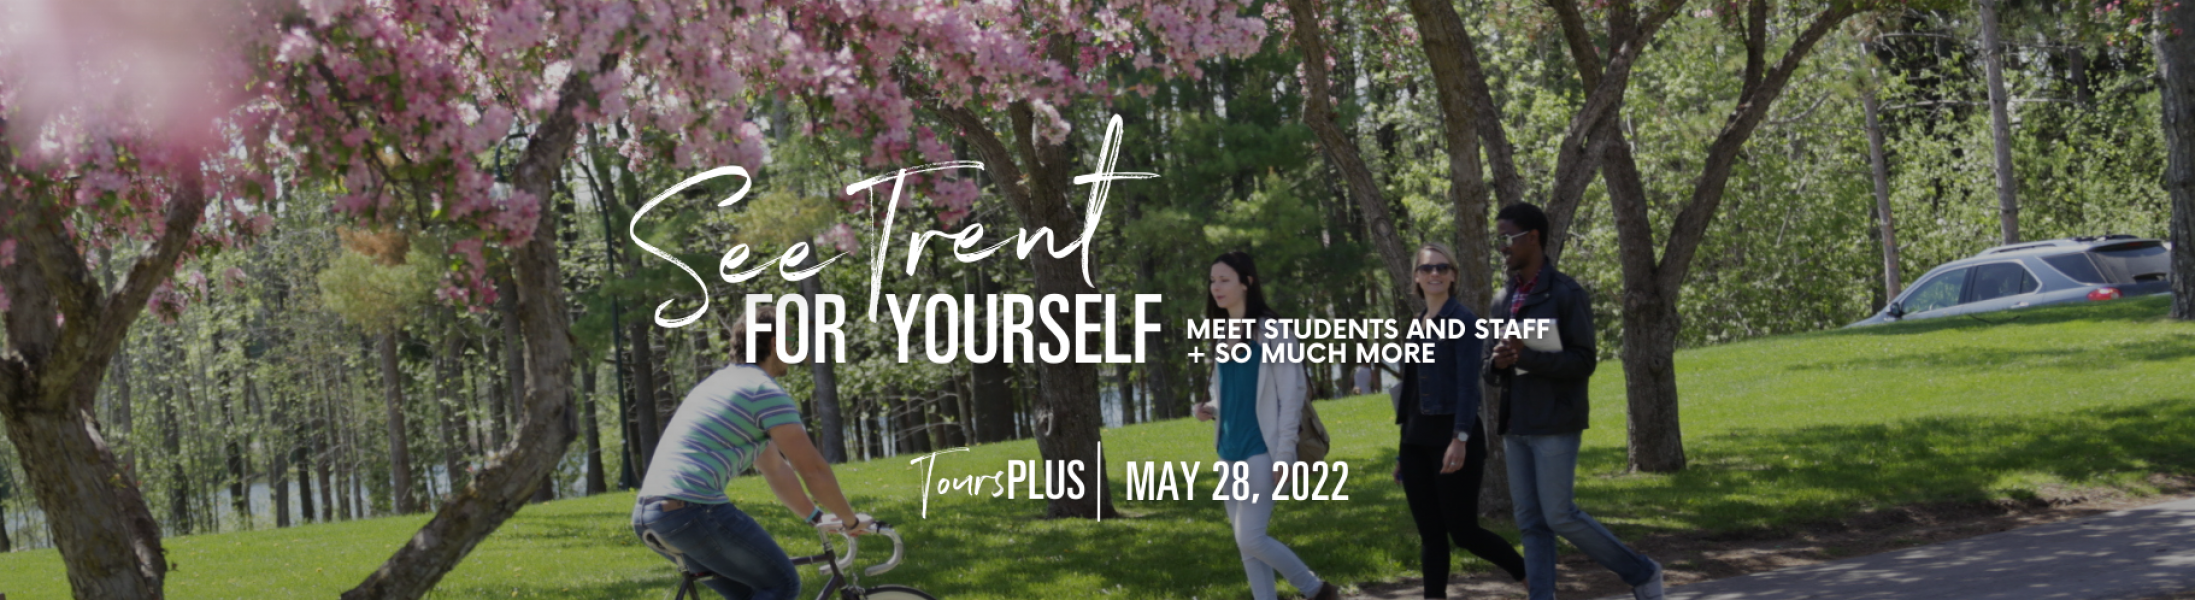 See Trent For Yourself - May 28